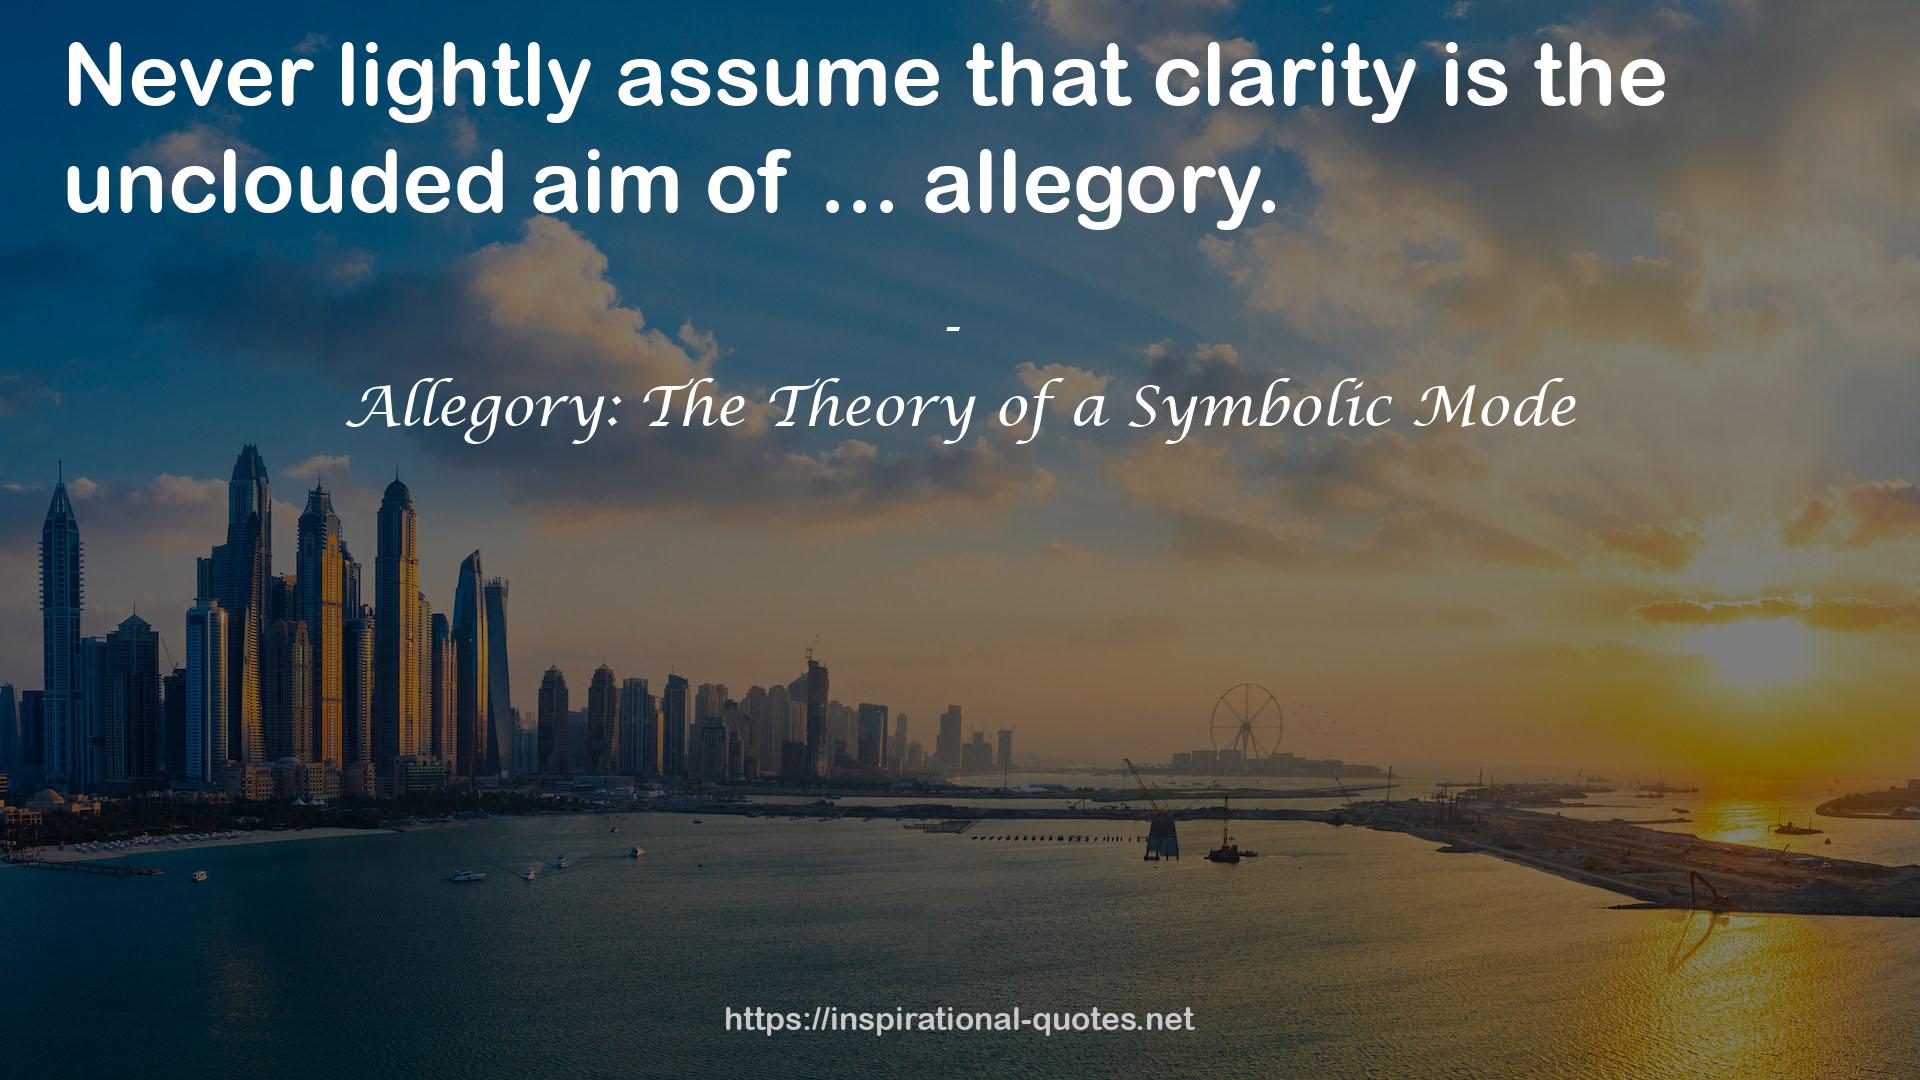 Allegory: The Theory of a Symbolic Mode QUOTES